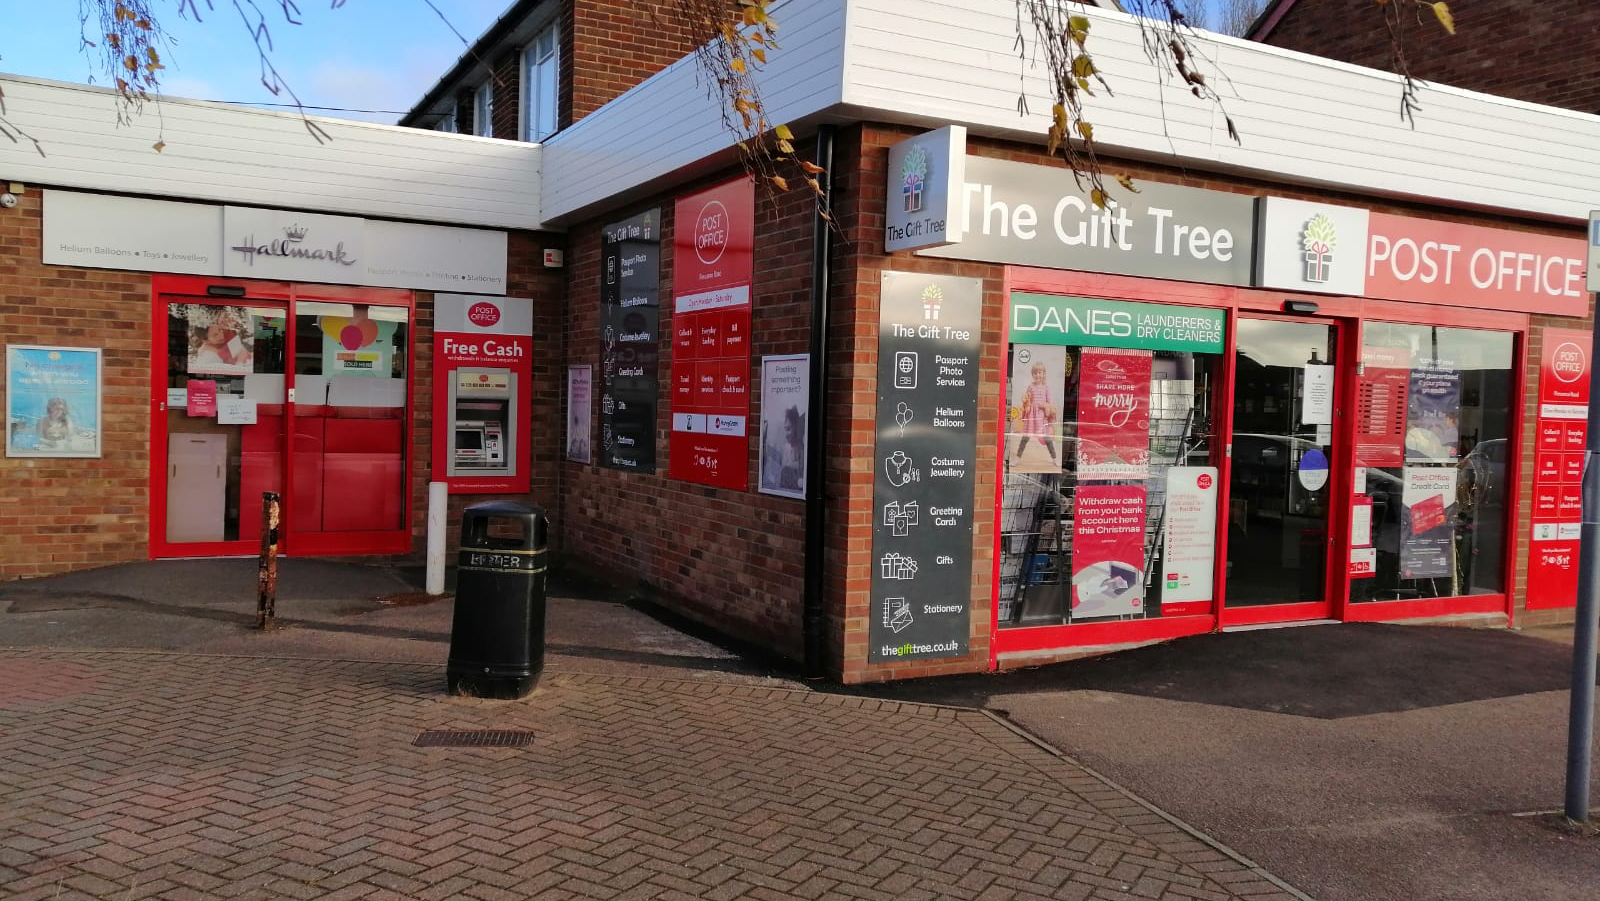 The Gift Tree and Post Office